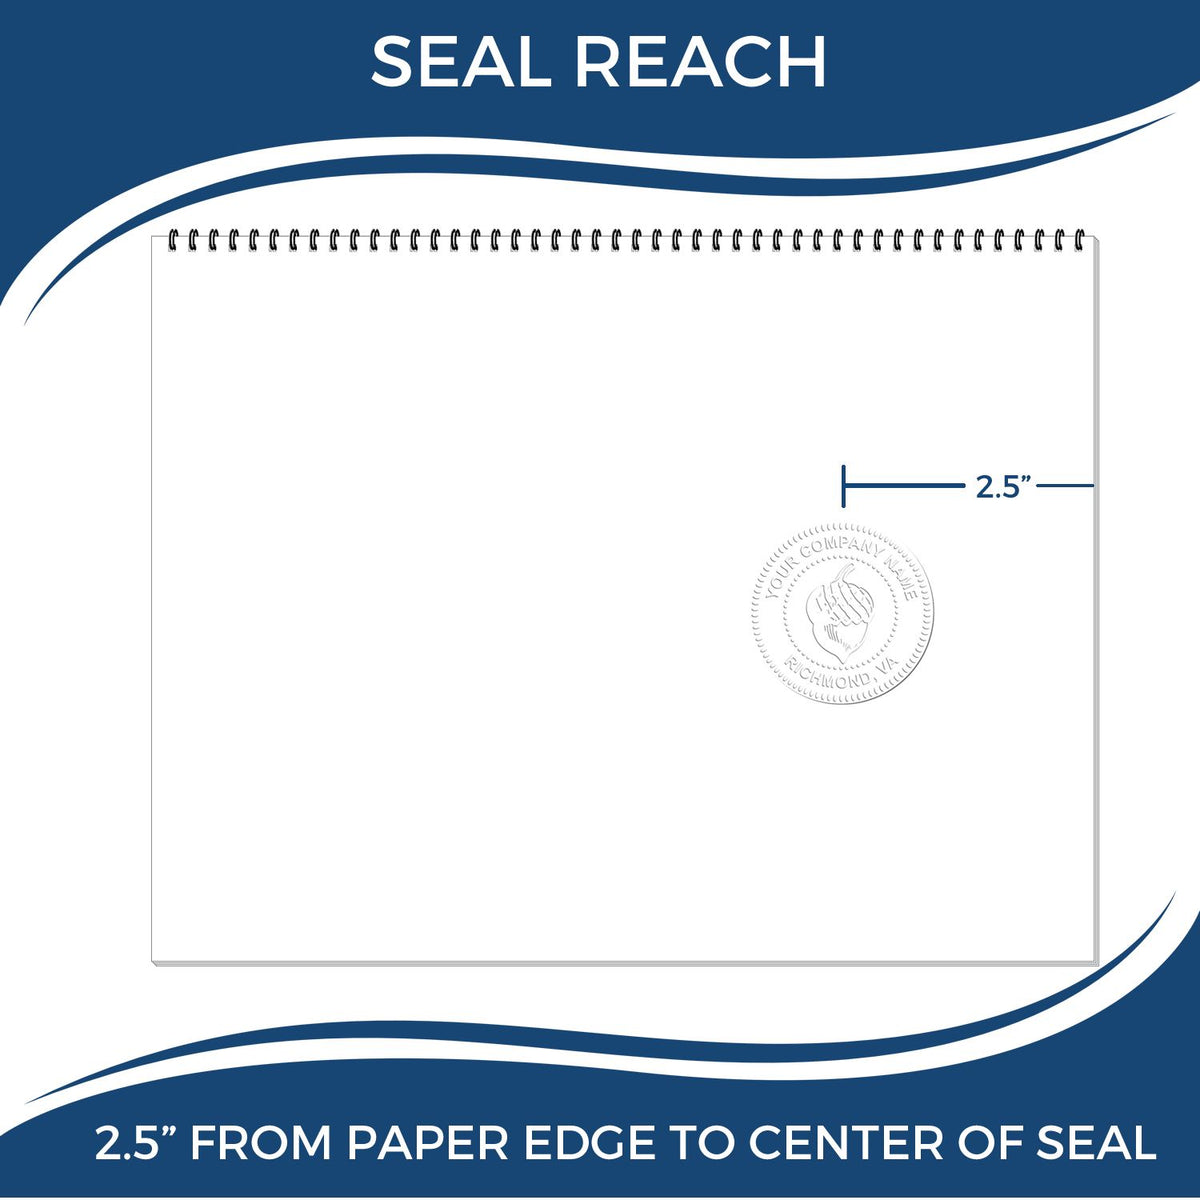 An infographic showing the seal reach which is represented by a ruler and a miniature seal image of the Long Reach Guam Geology Seal